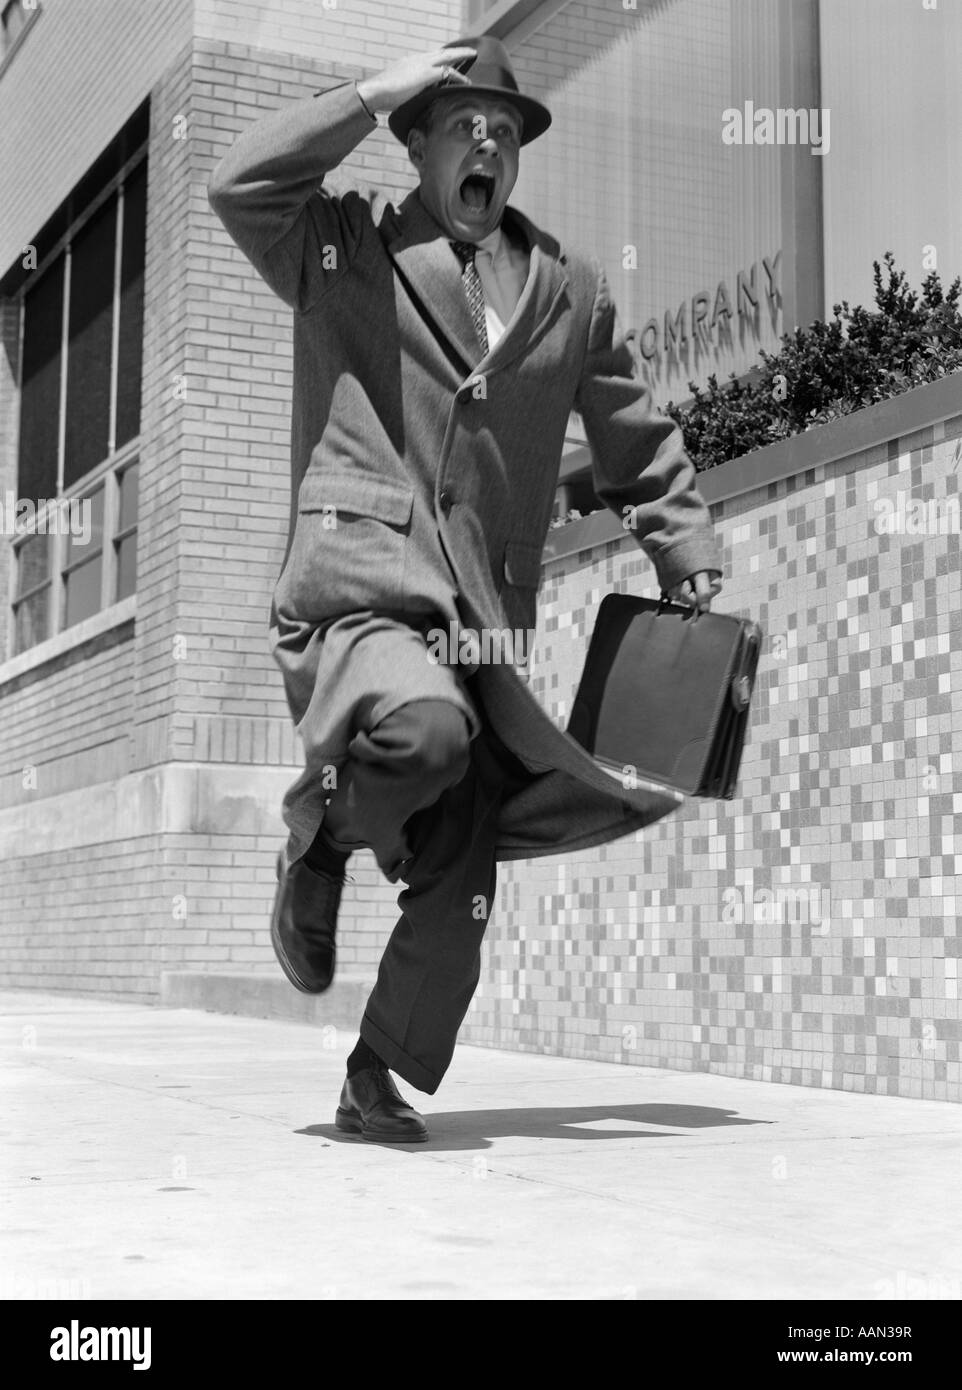 1960s 1950s FRANTIC MAN RUNNING DOWN STREET HOLDING HAT ON WITH HAND CARRYING BRIEFCASE WEARING TOP COAT Stock Photo